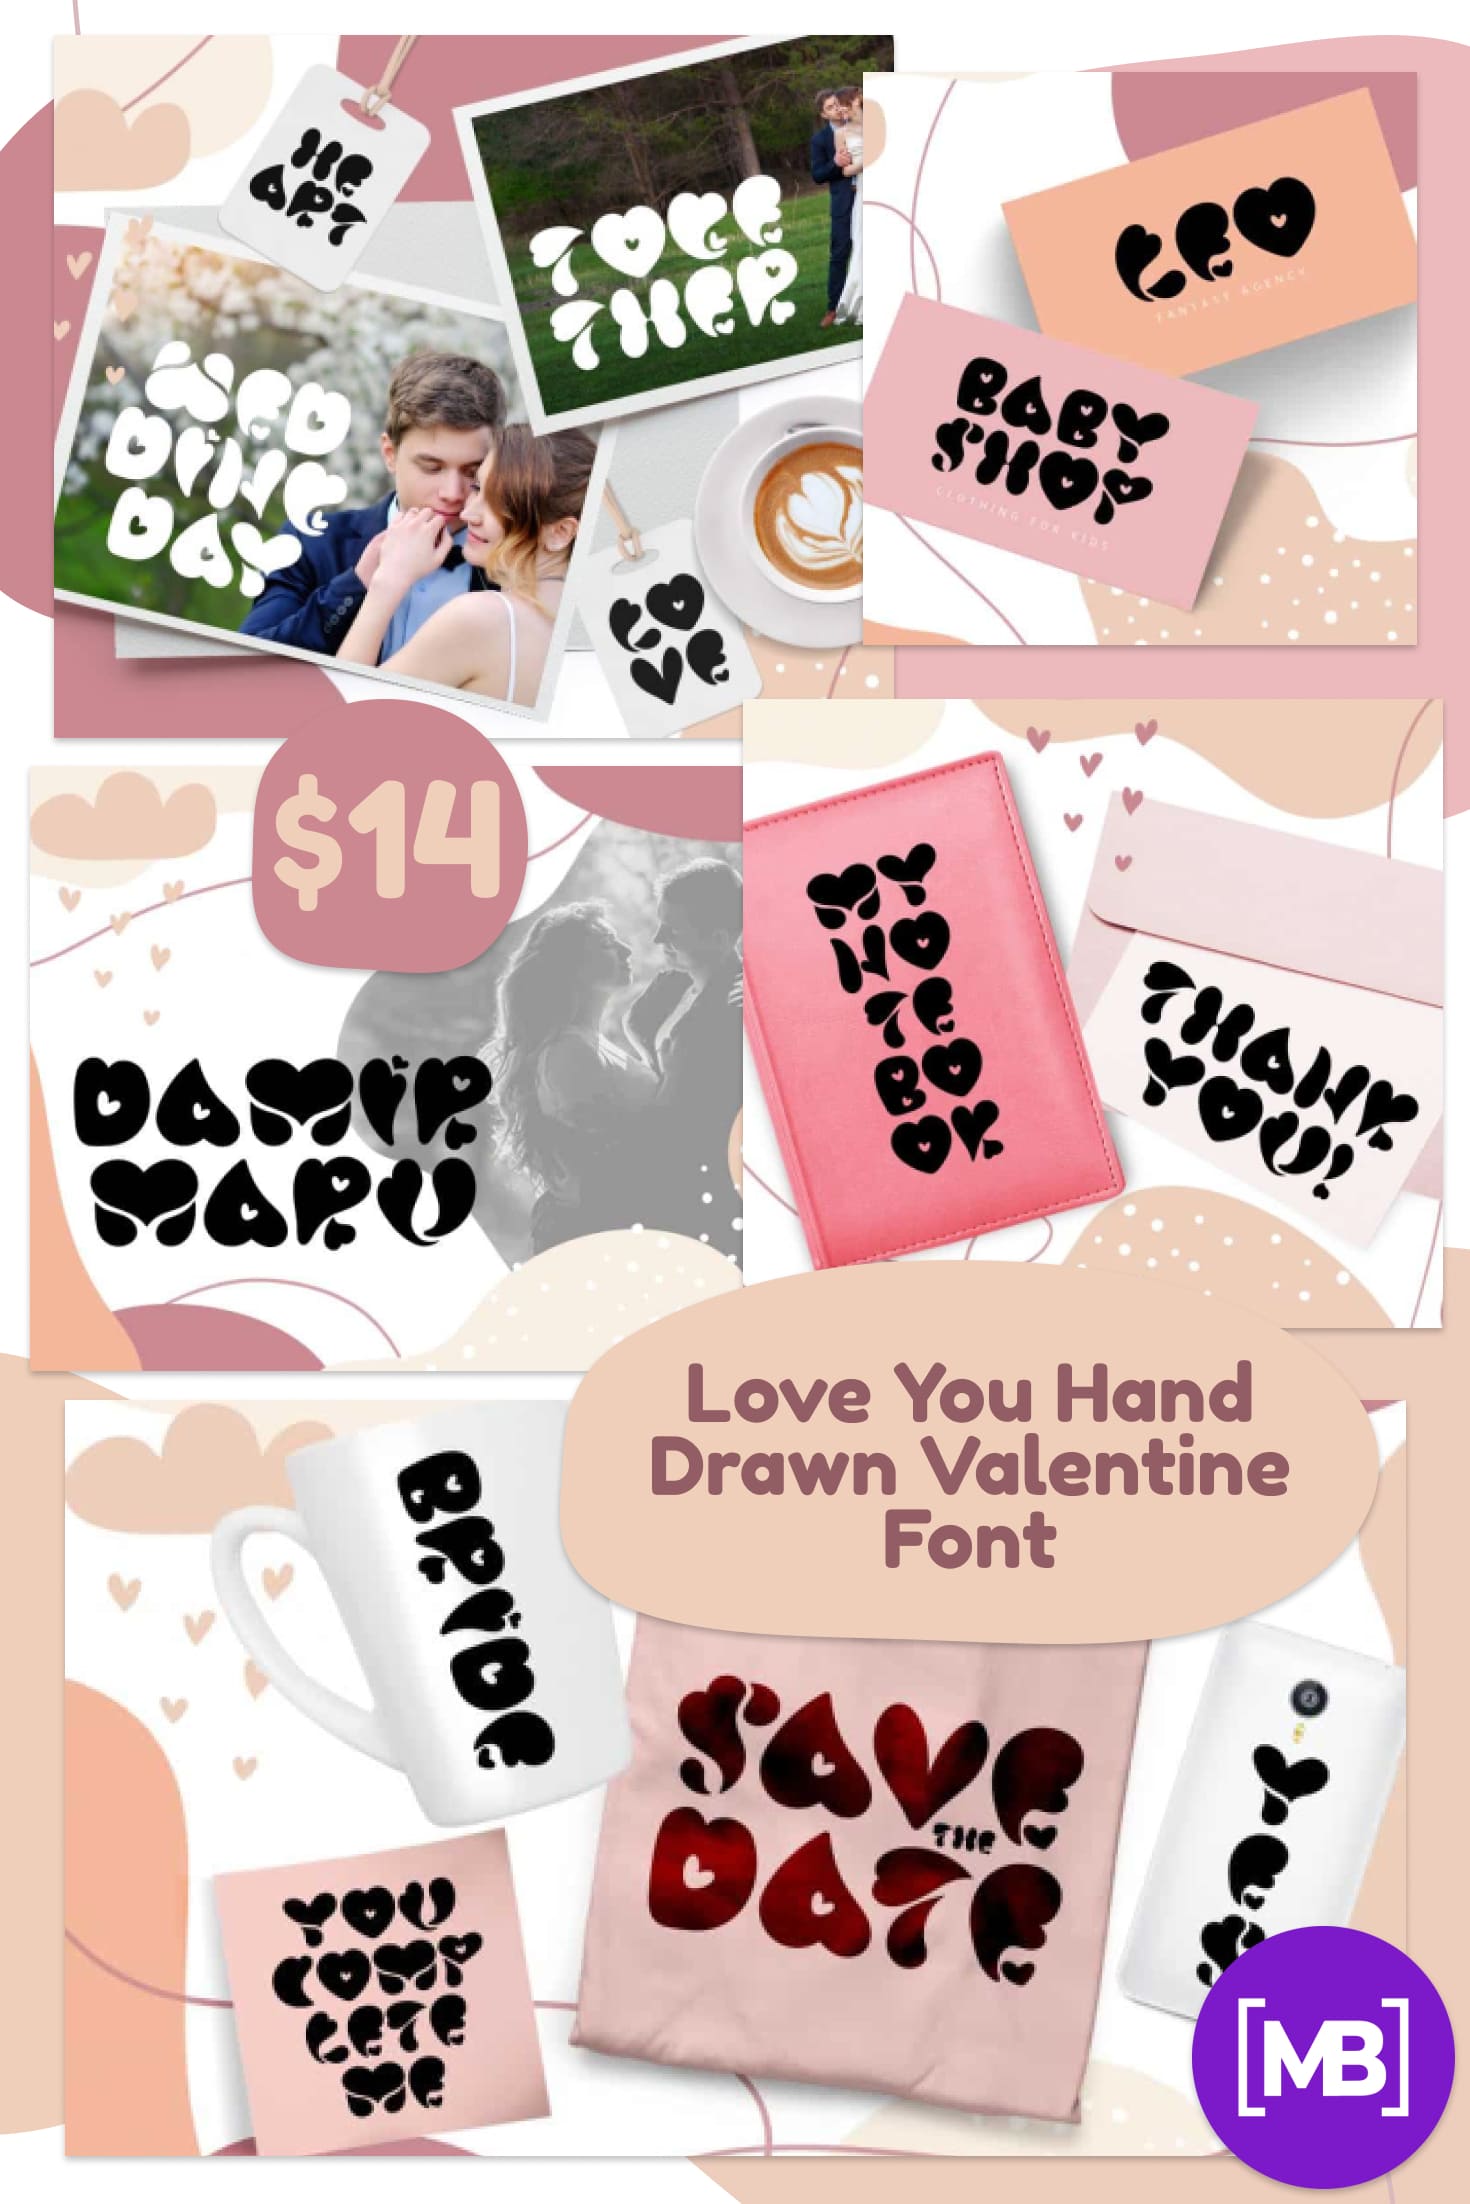 Pinterest Image: Best Font With Hearts. Love You Hand Drawn Valentine Font - $10.